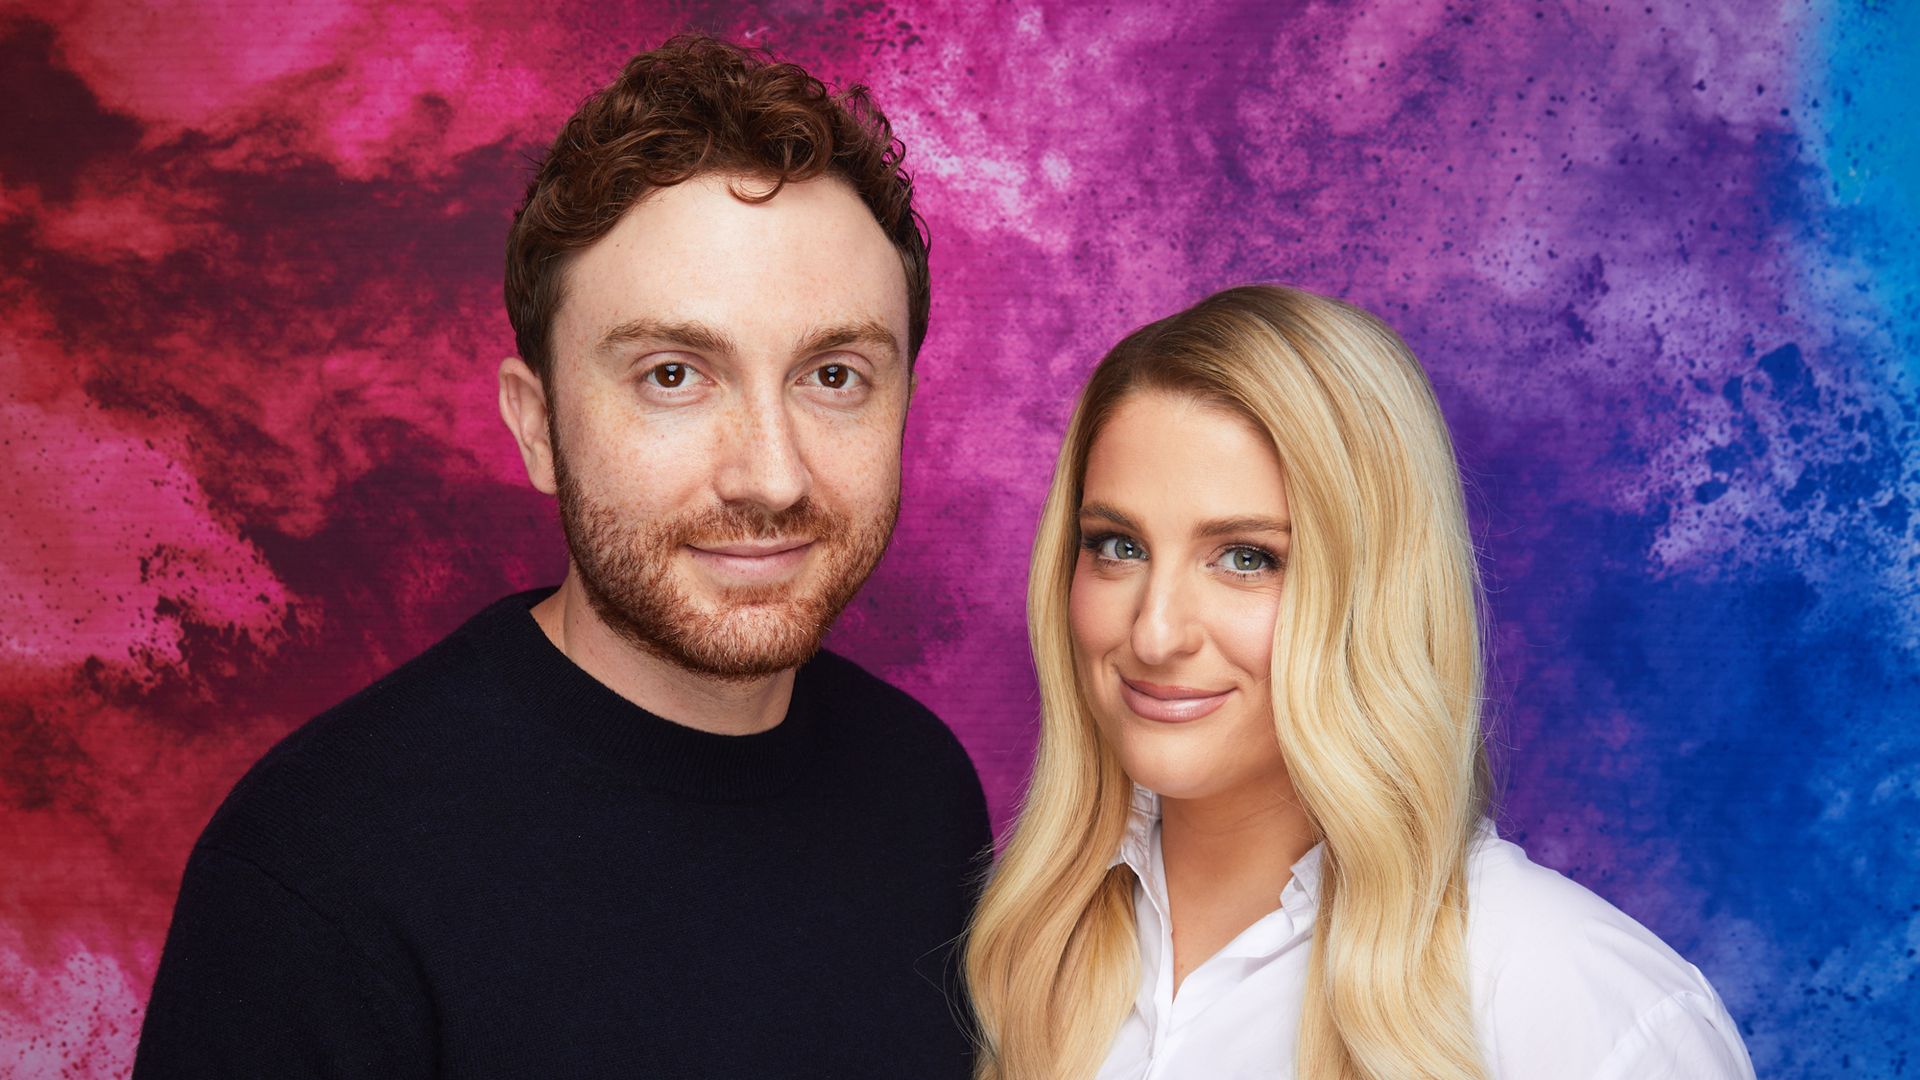 THE KELLY CLARKSON SHOW -- Episode J055 -- Pictured: Daryl Sabara, Meghan Trainor